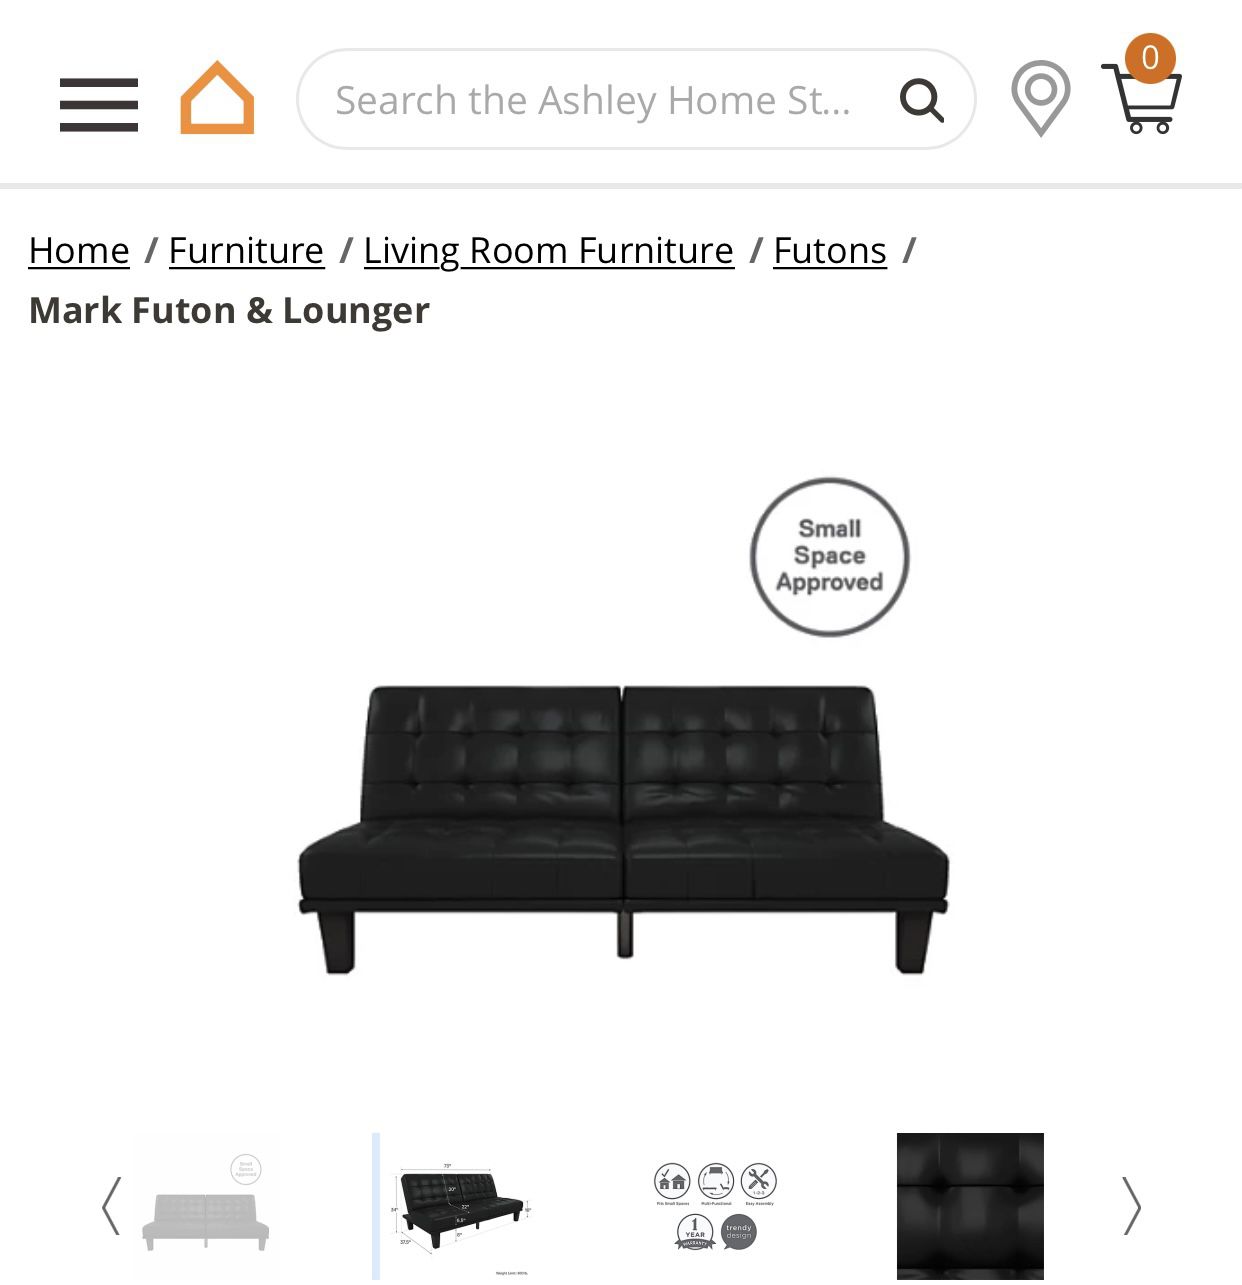 Brand new Still In Box Black Feaux Leather Mark Futon & Lounger  from Ashleys Furniture 